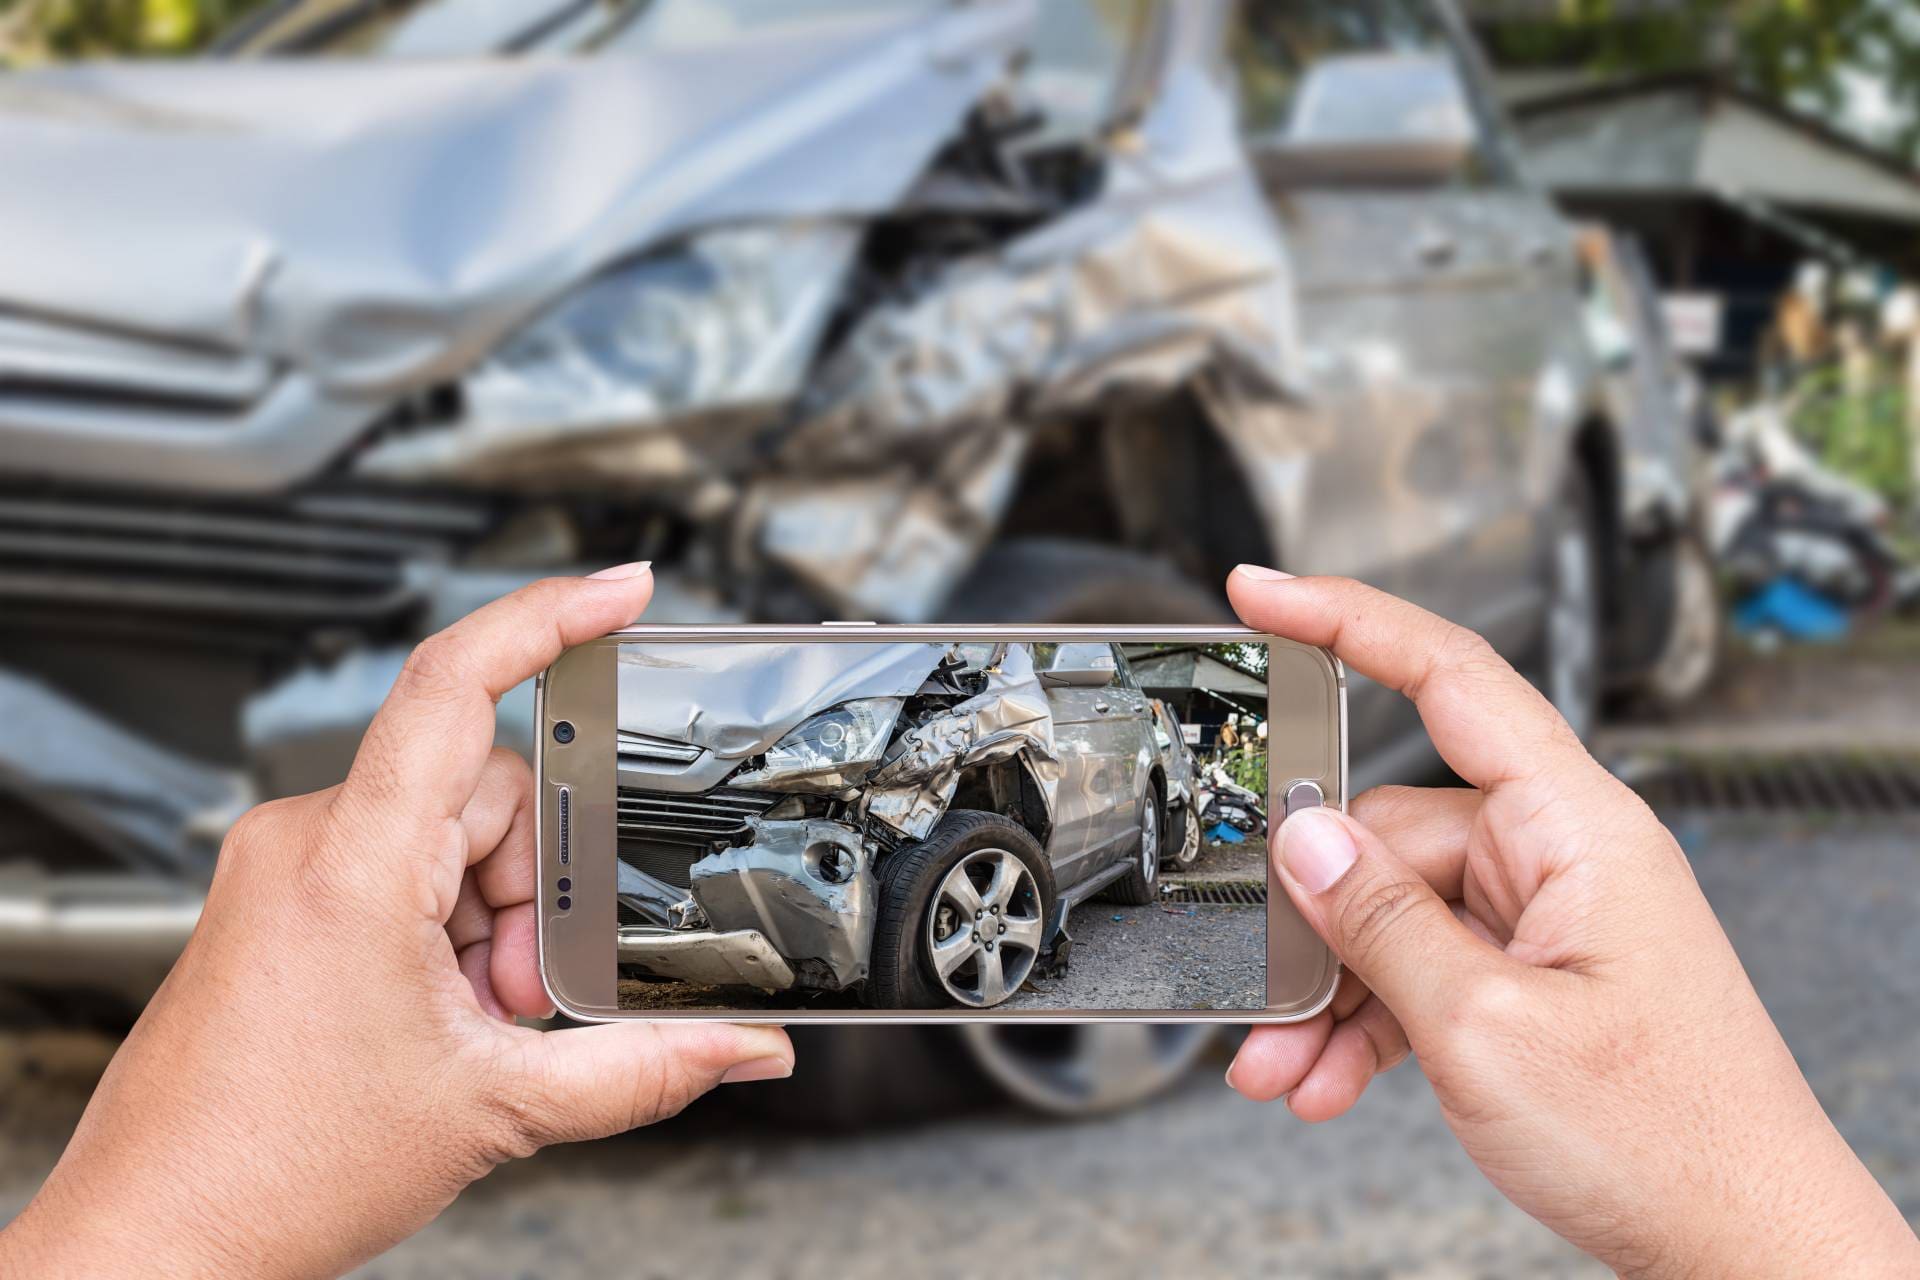 Photographs are important in helping prove liability and negligence. We need photos of the damage to the car you were in and of any visible injuries you received, such as cuts, bruises or lacerations.